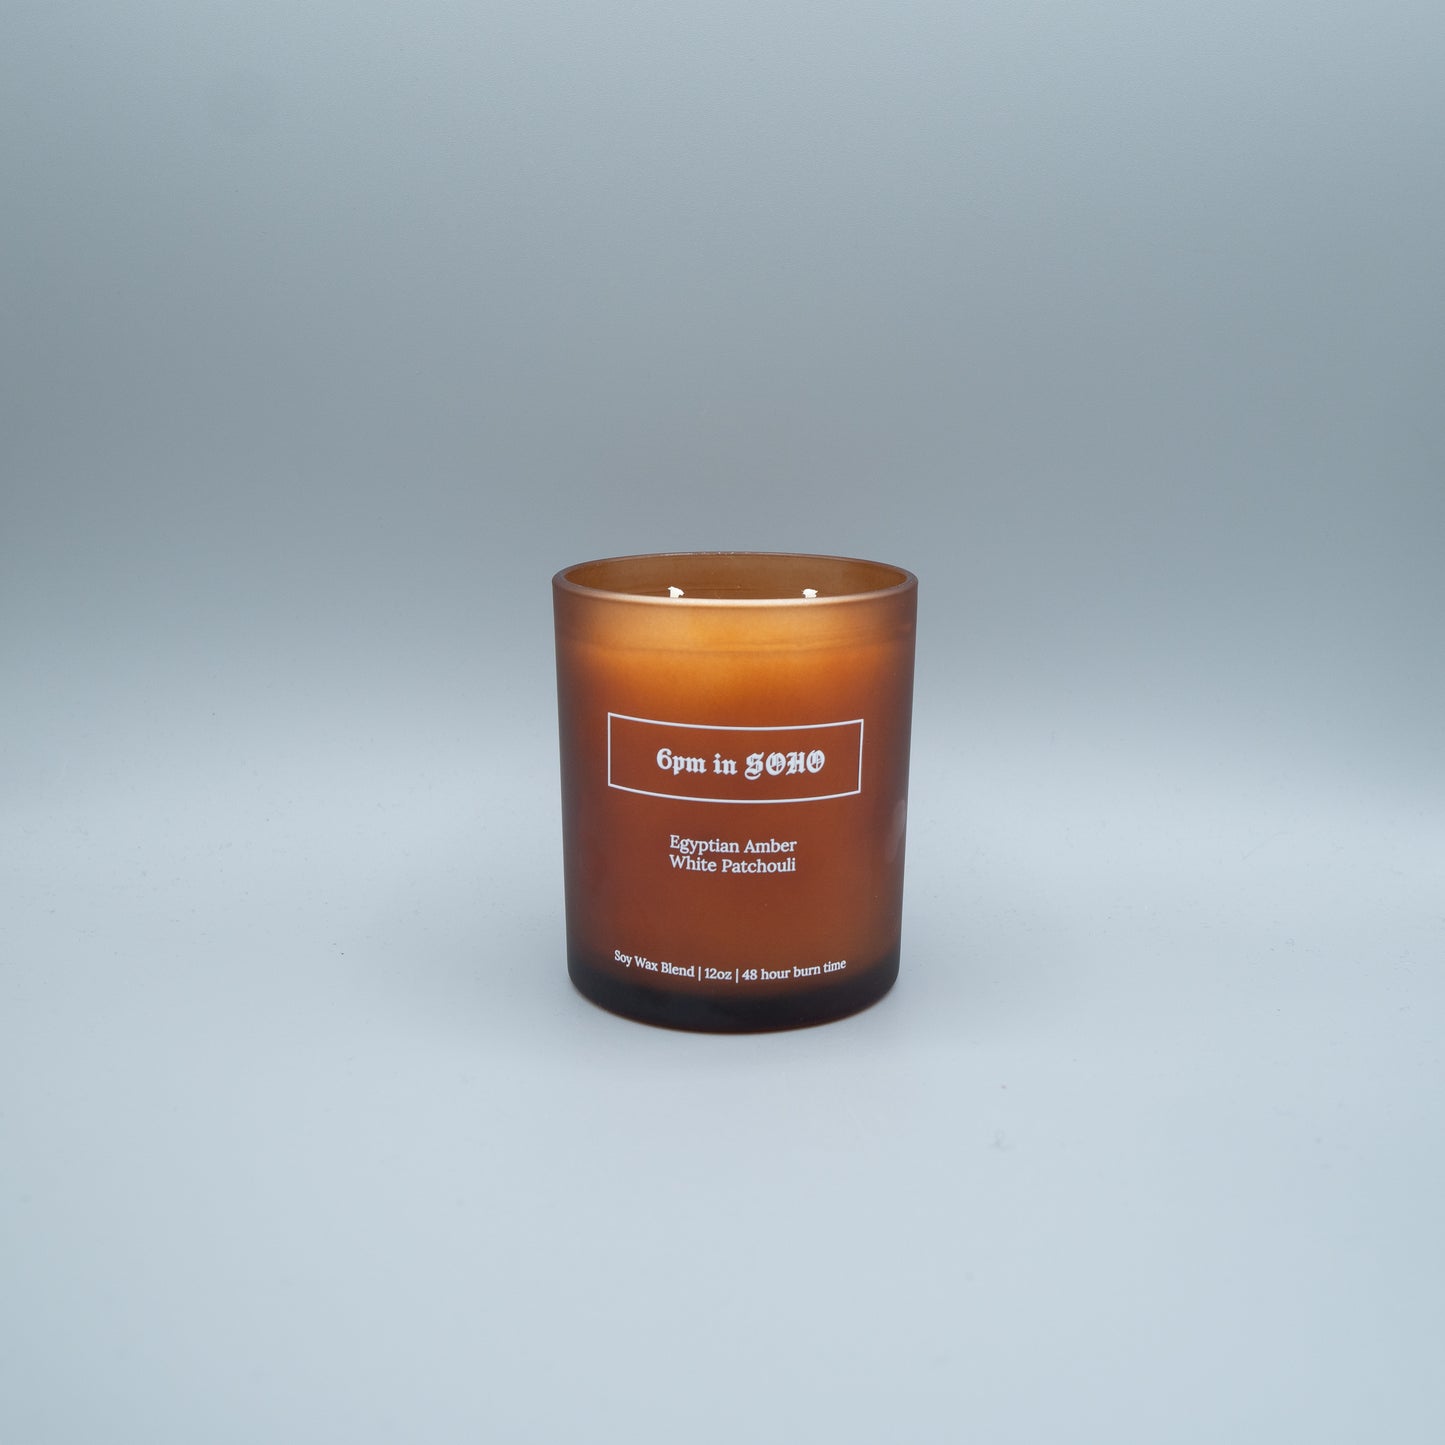 6pm in SOHO Candle